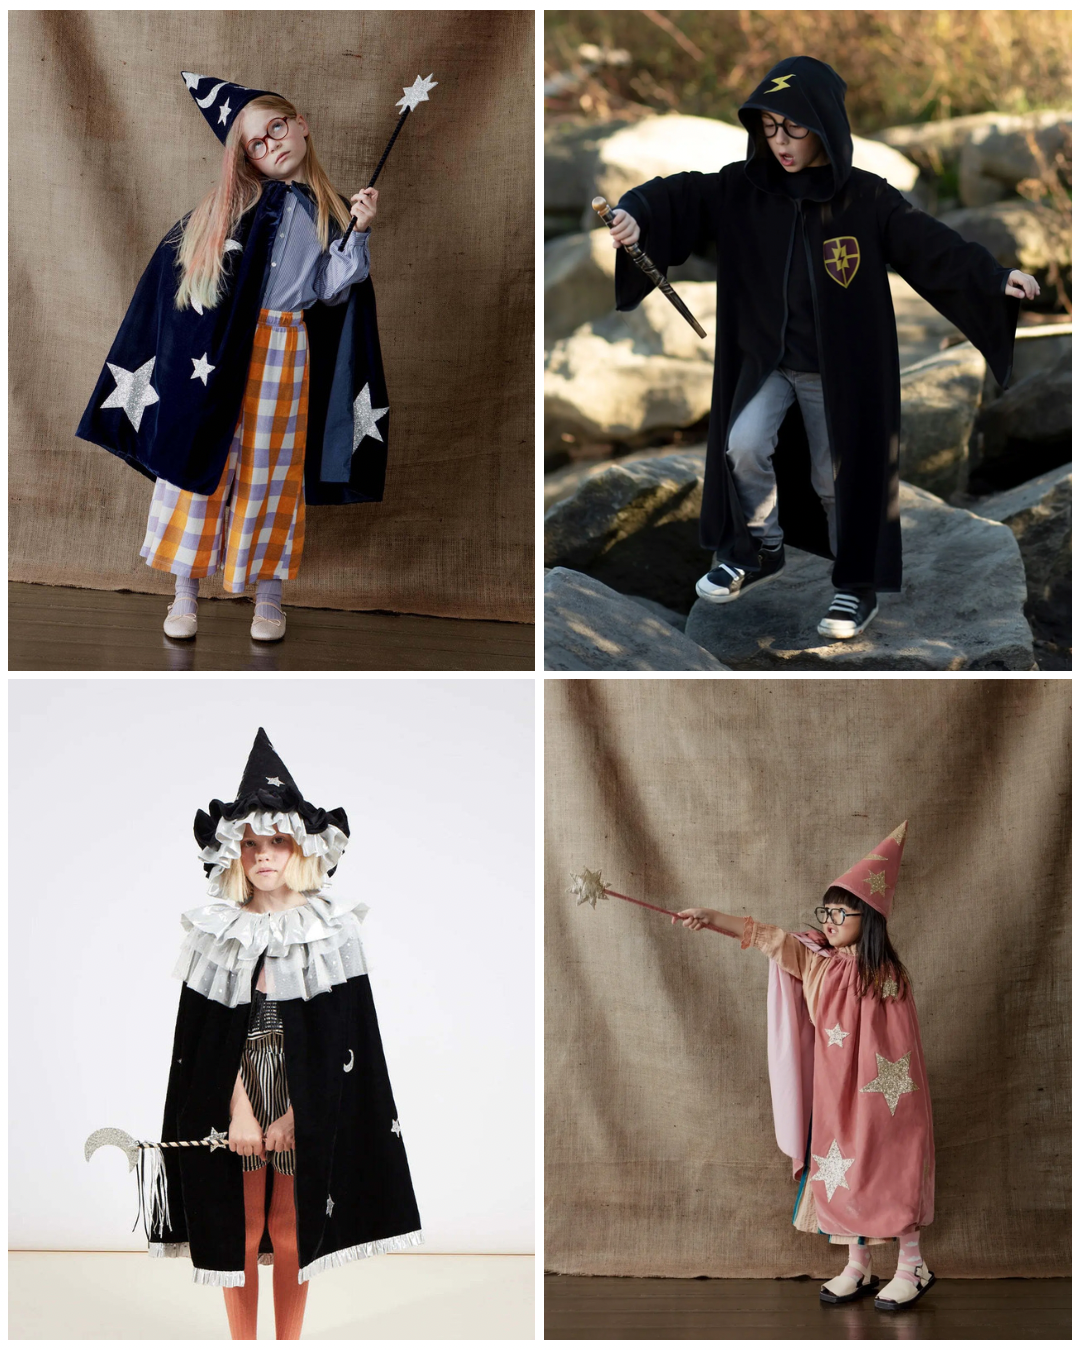 Witch Costumes